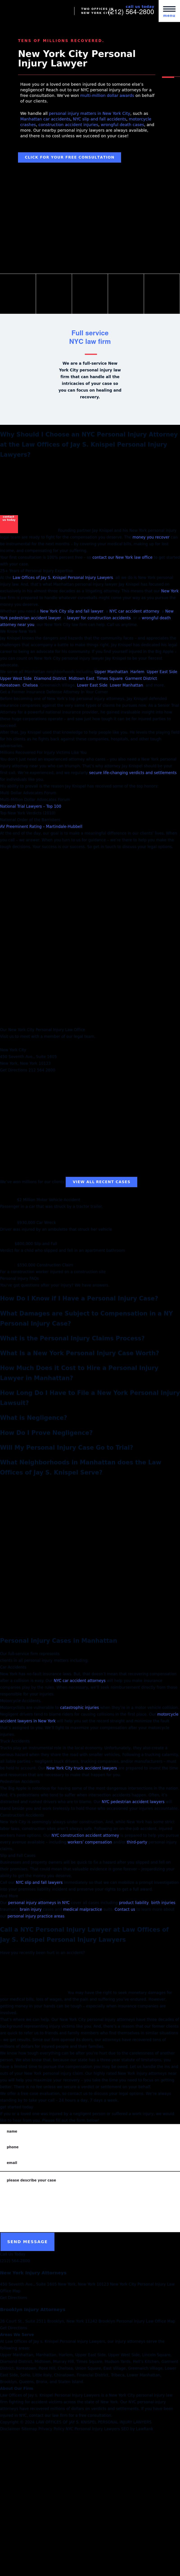 Law Offices of Jay S. Knispel Personal Injury Lawyers - New York NY Lawyers